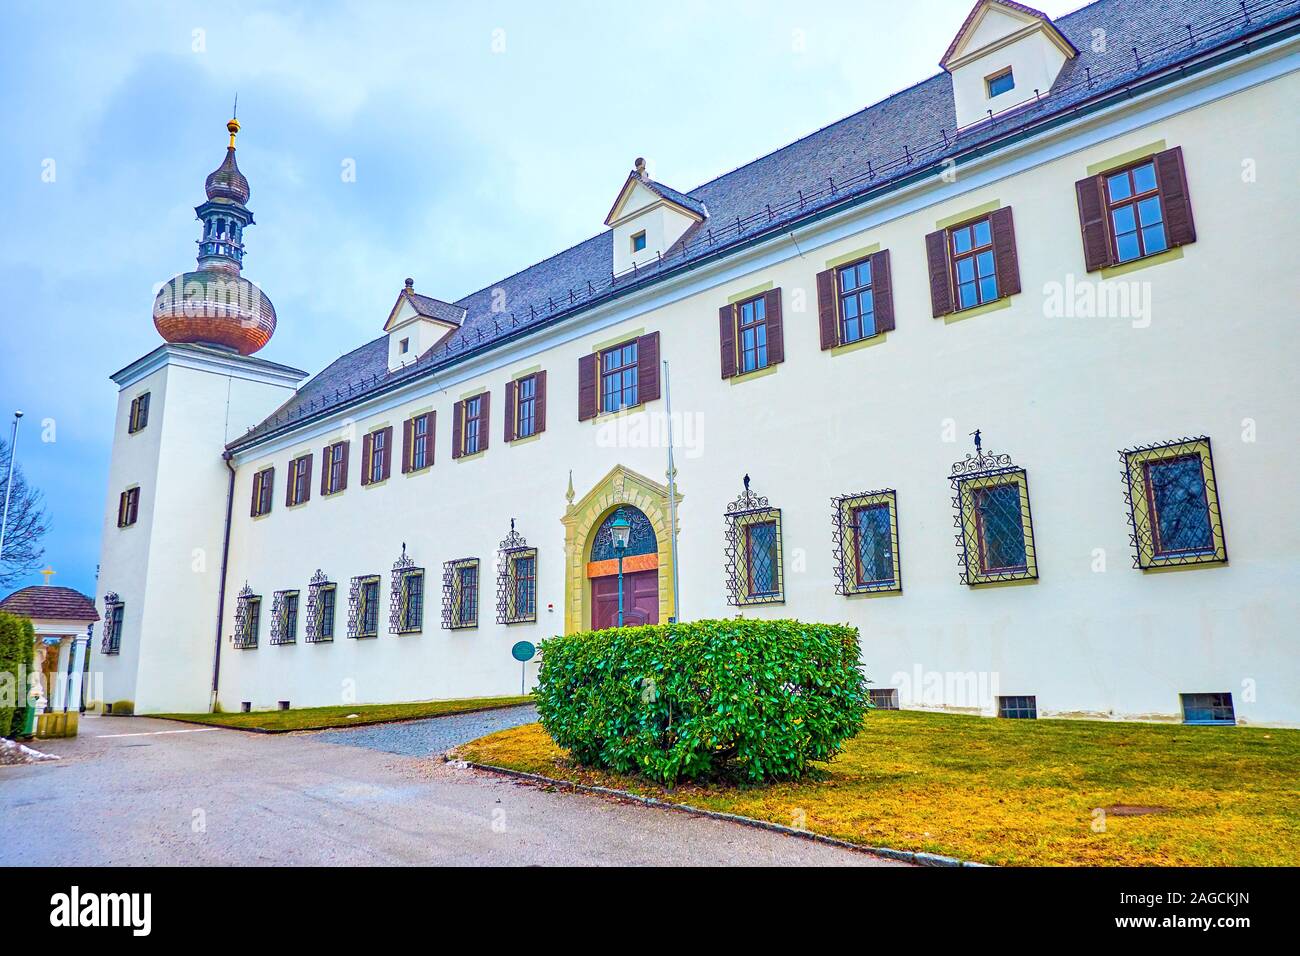 The scenic facade of the Orth Landschloss castle with main entrance gates and the side tower, Gmunden, Austria Stock Photo